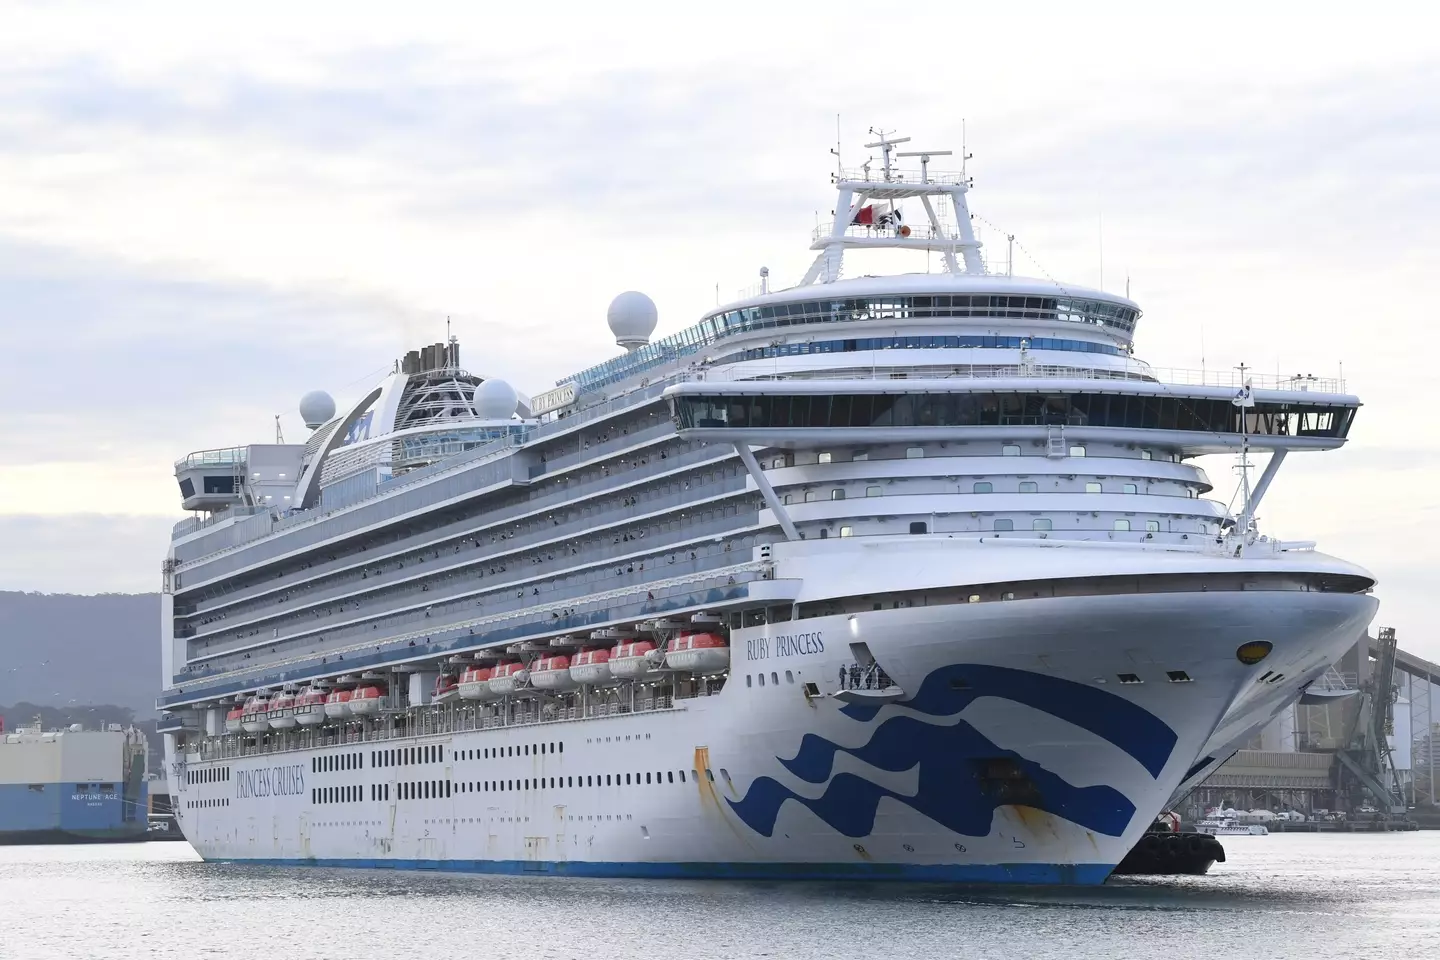 The Ruby Princess cruise ship that Kevin stayed on for a month (James D. Morgan/Getty Images)